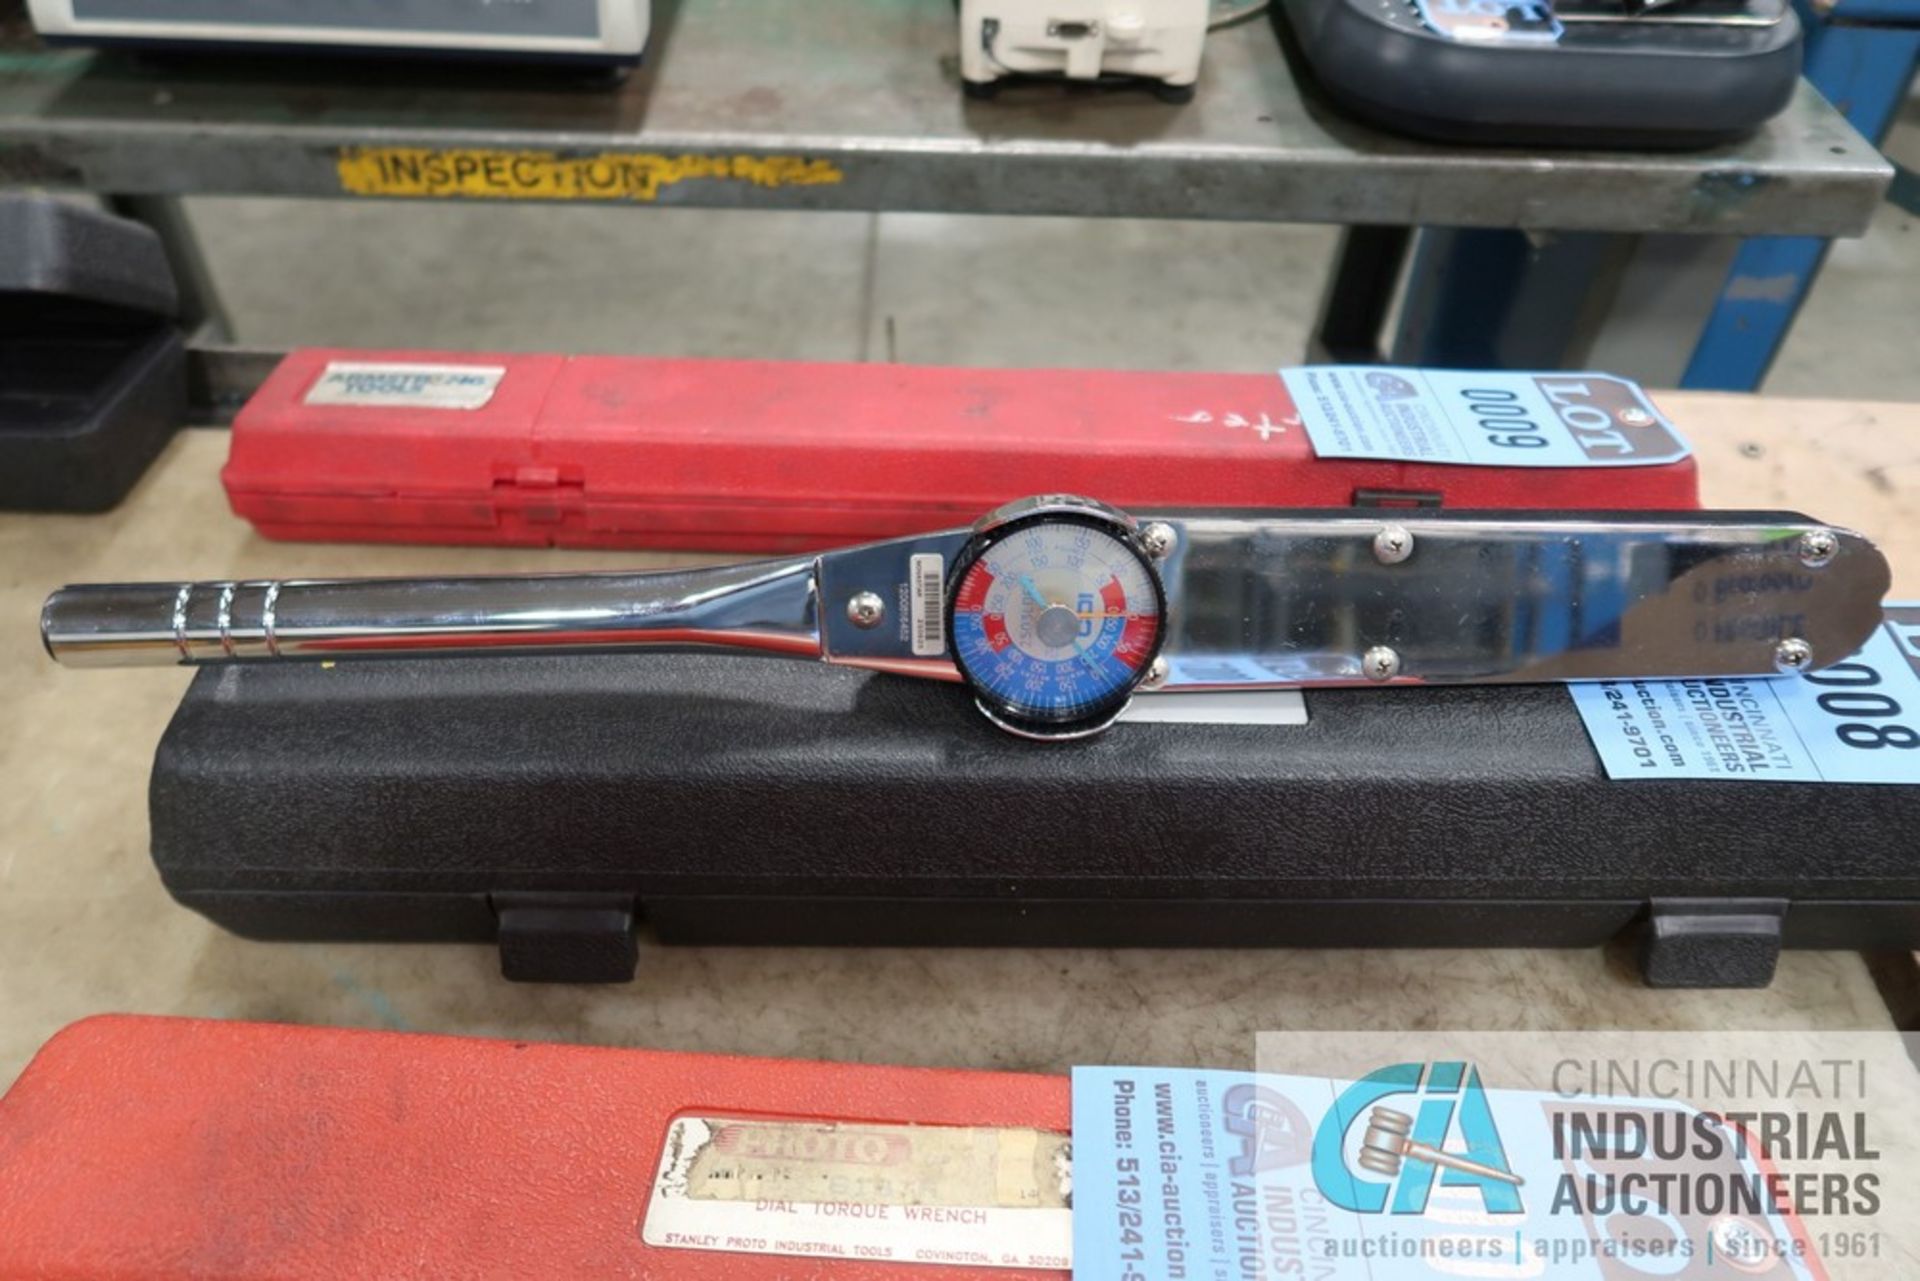 0-250 FT. LB. CDI 1/2" DRIVE DIAL TORQUE WRENCH